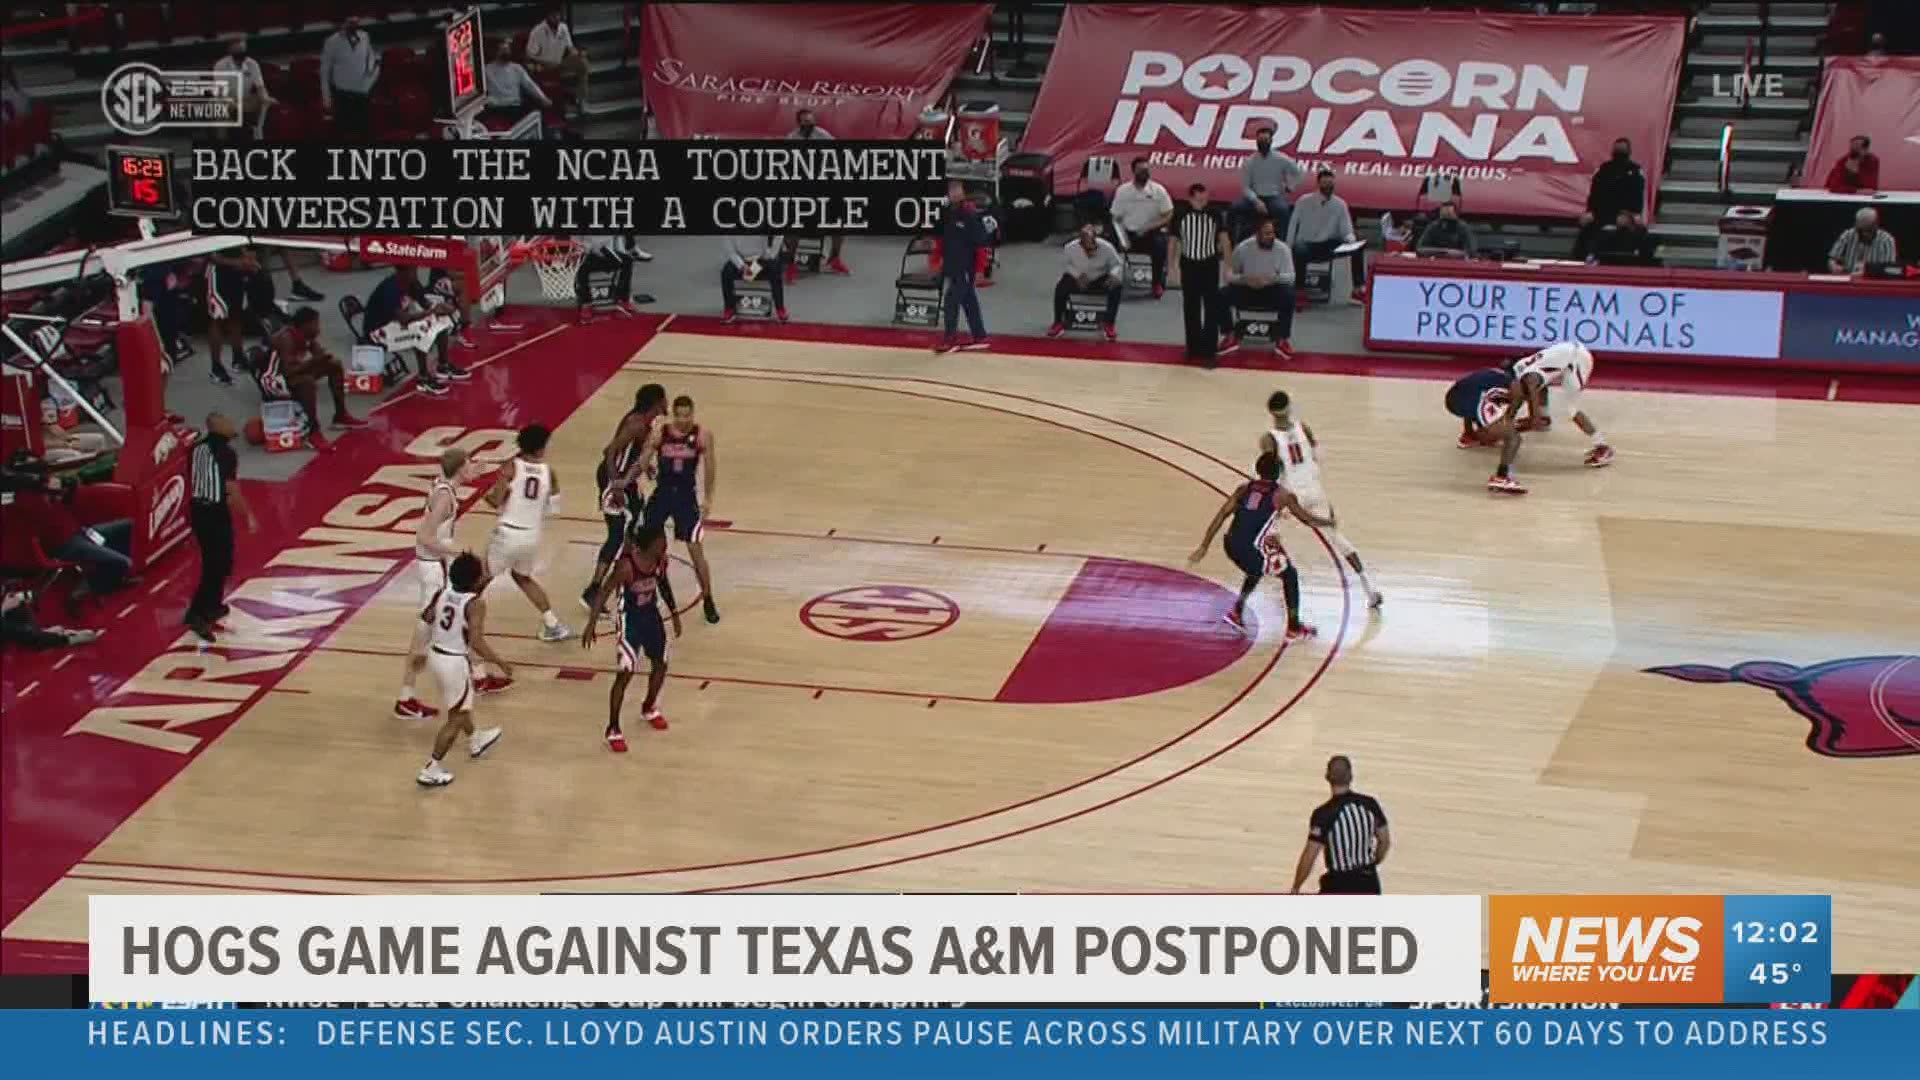 The postponement was caused by Covid-19 outbreaks within the Texas A&M program.